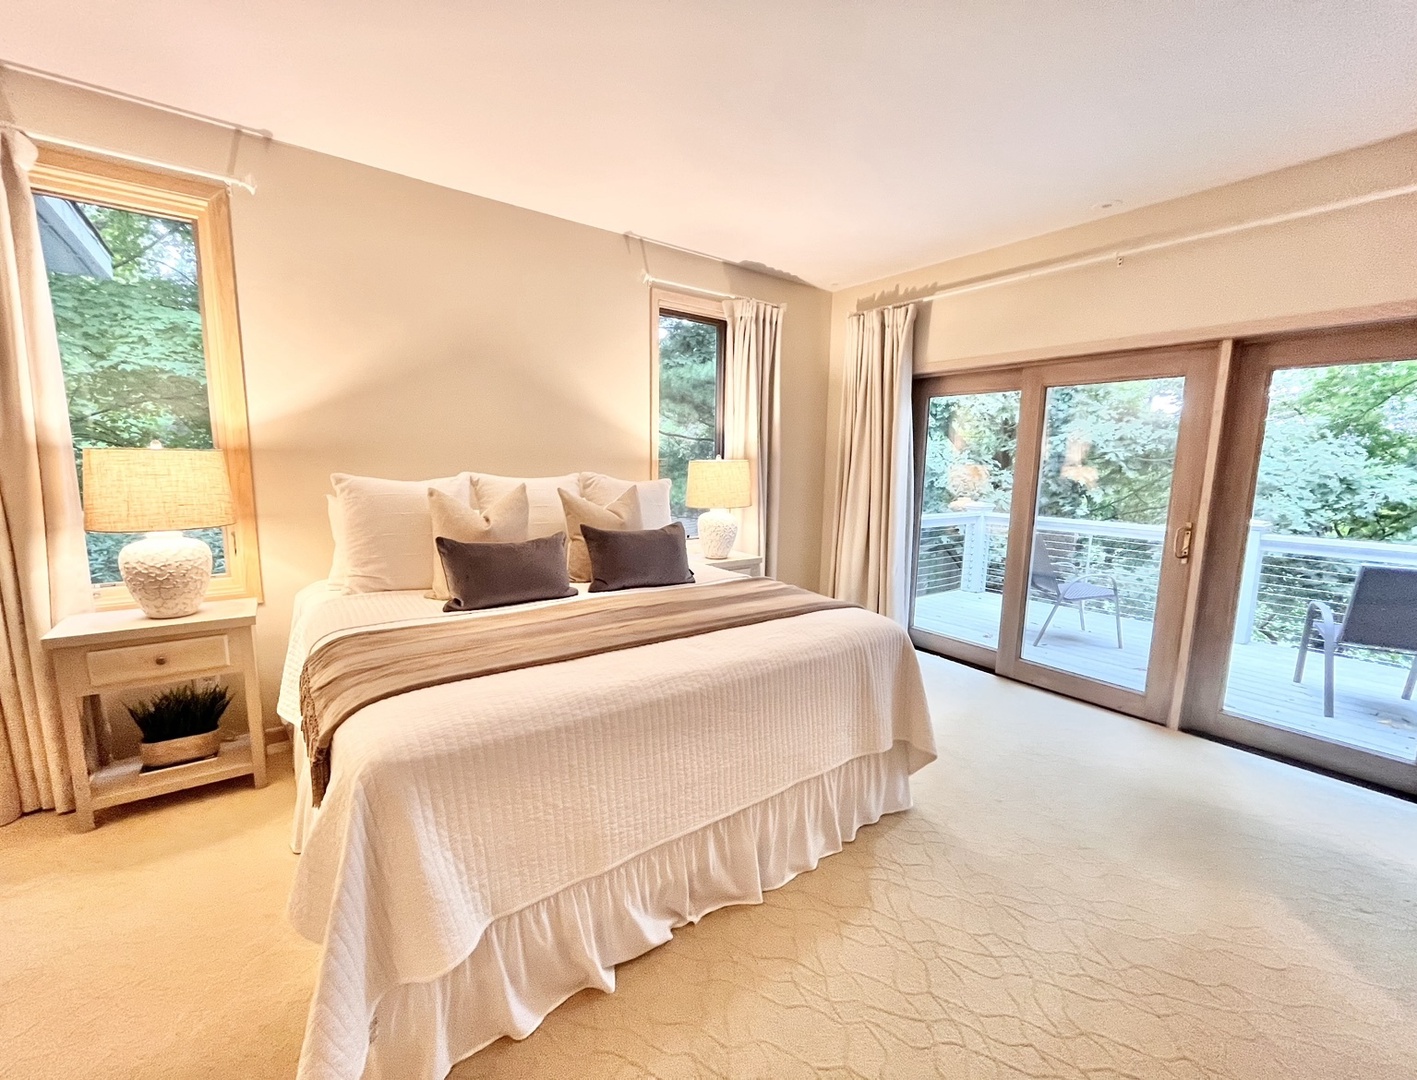 The main level king suite offers a private en suite & access to the back deck